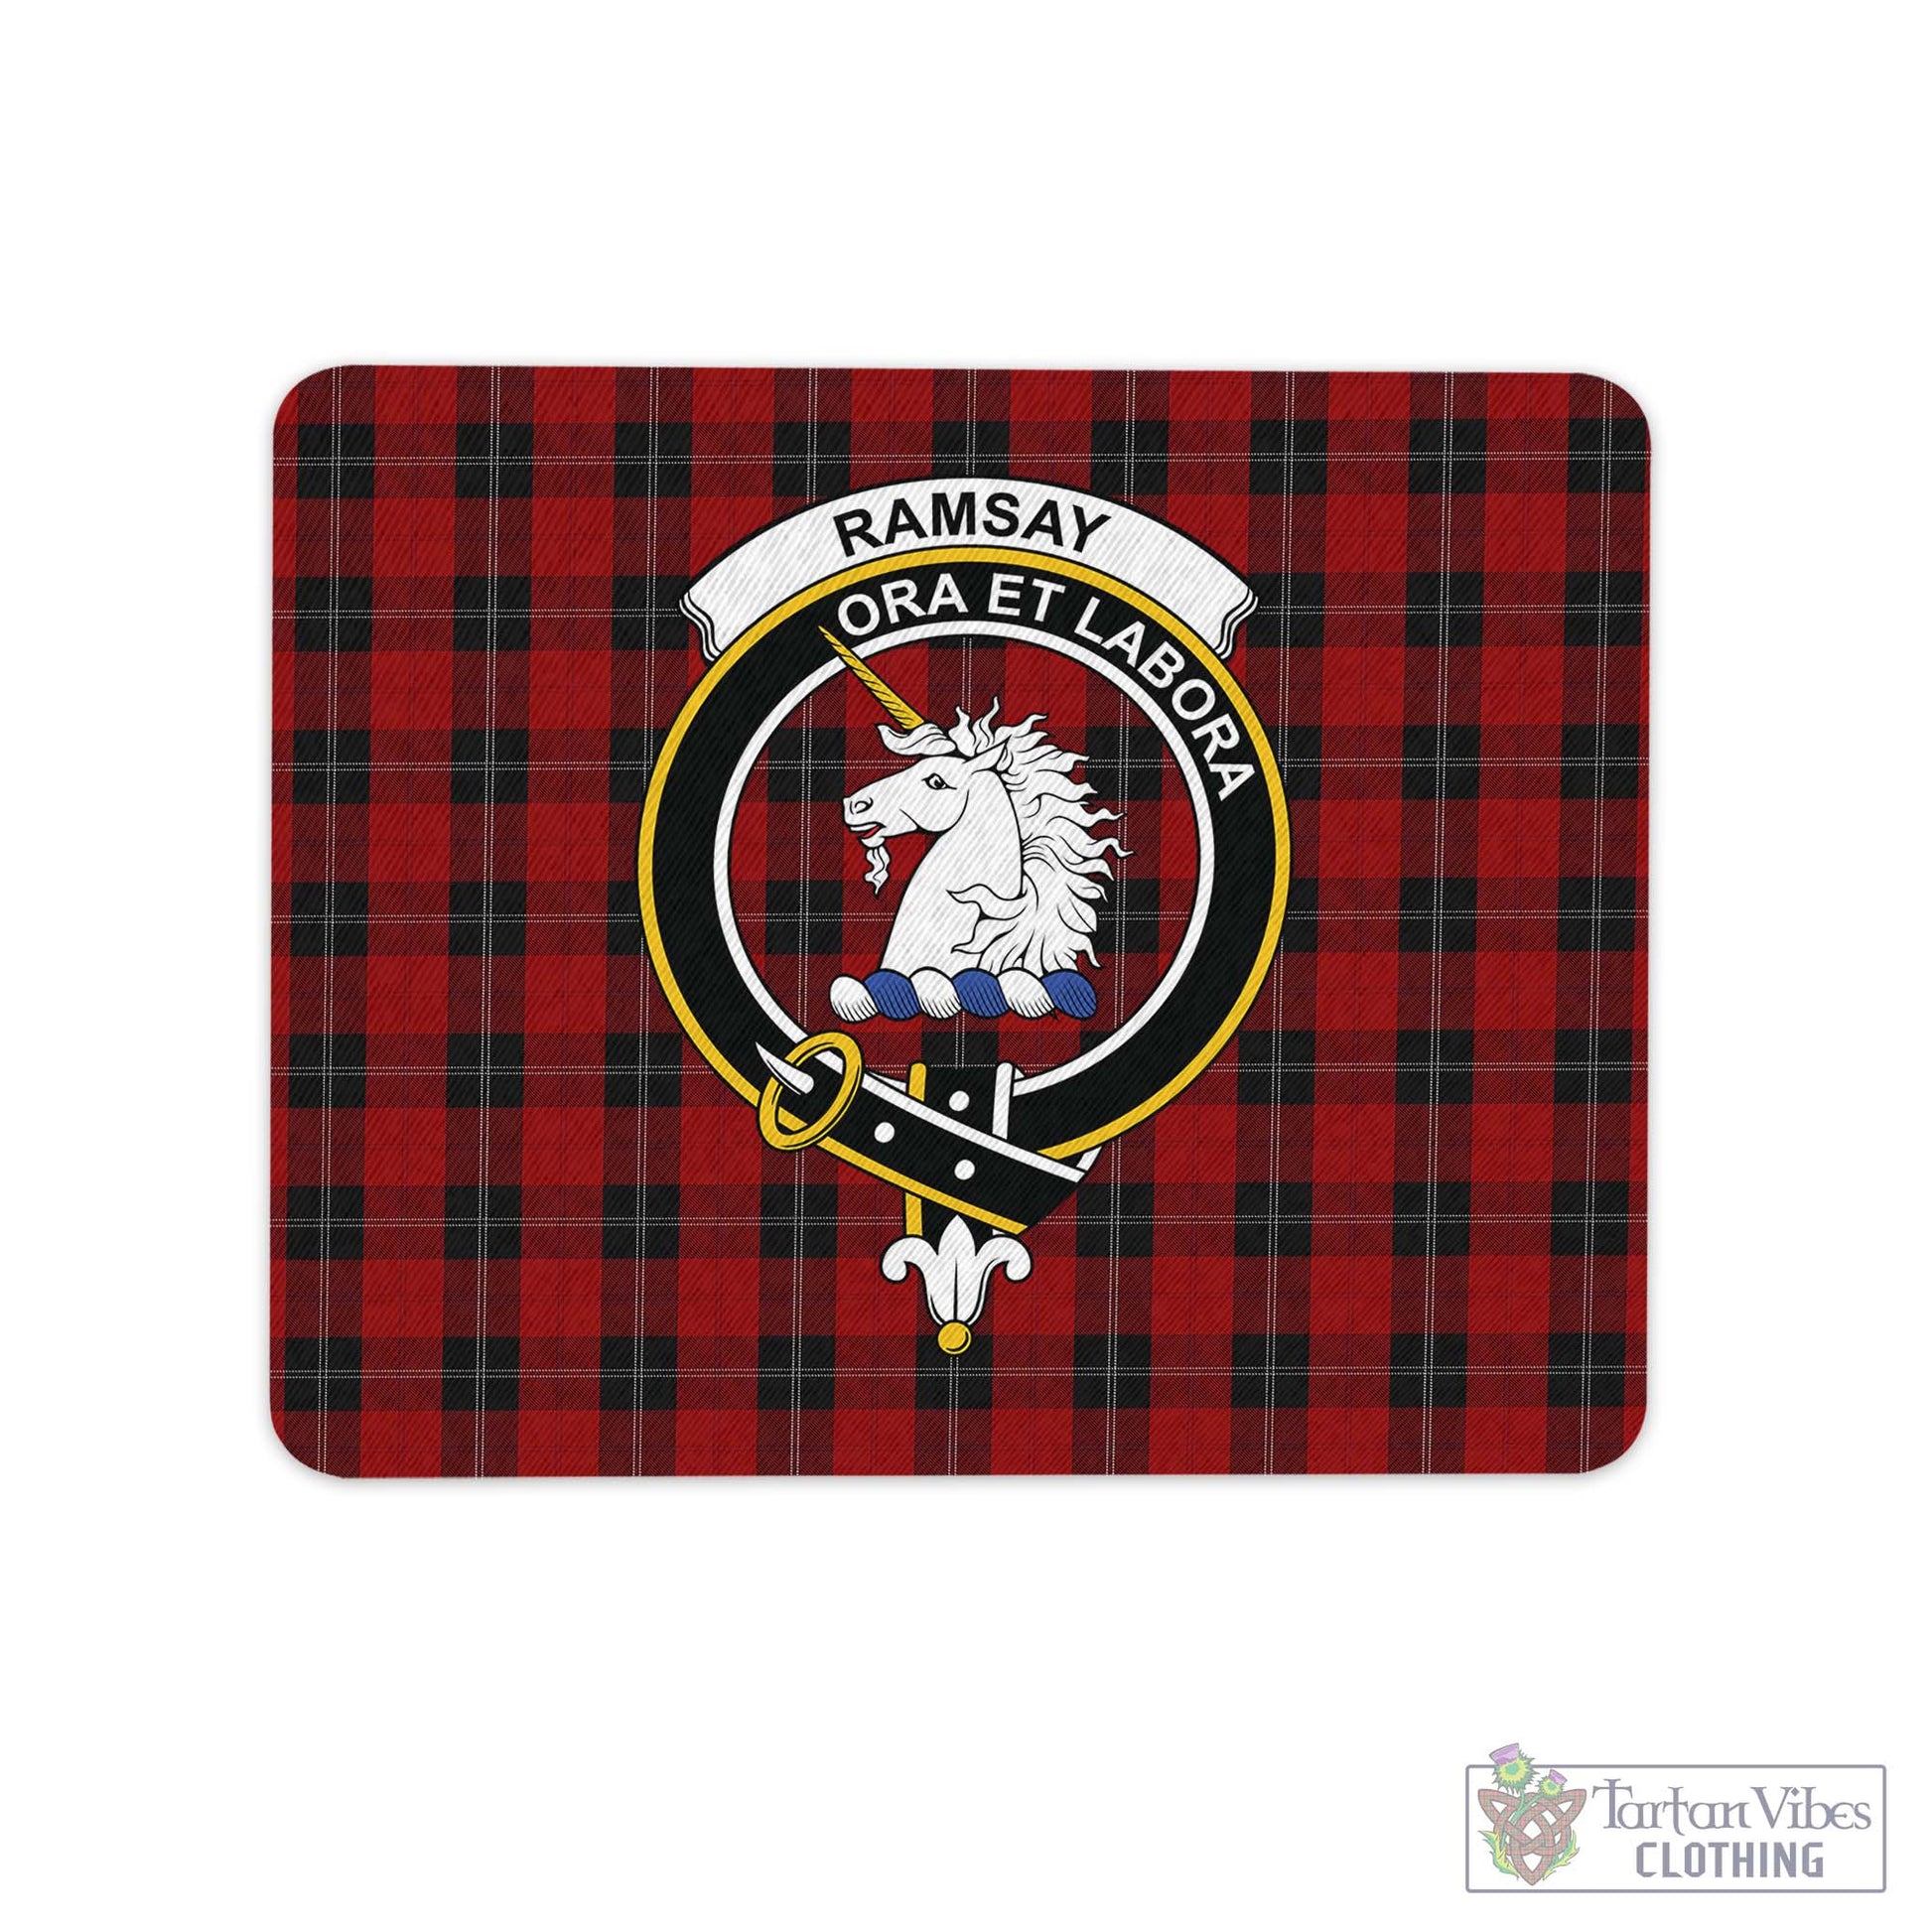 Tartan Vibes Clothing Ramsay Tartan Mouse Pad with Family Crest